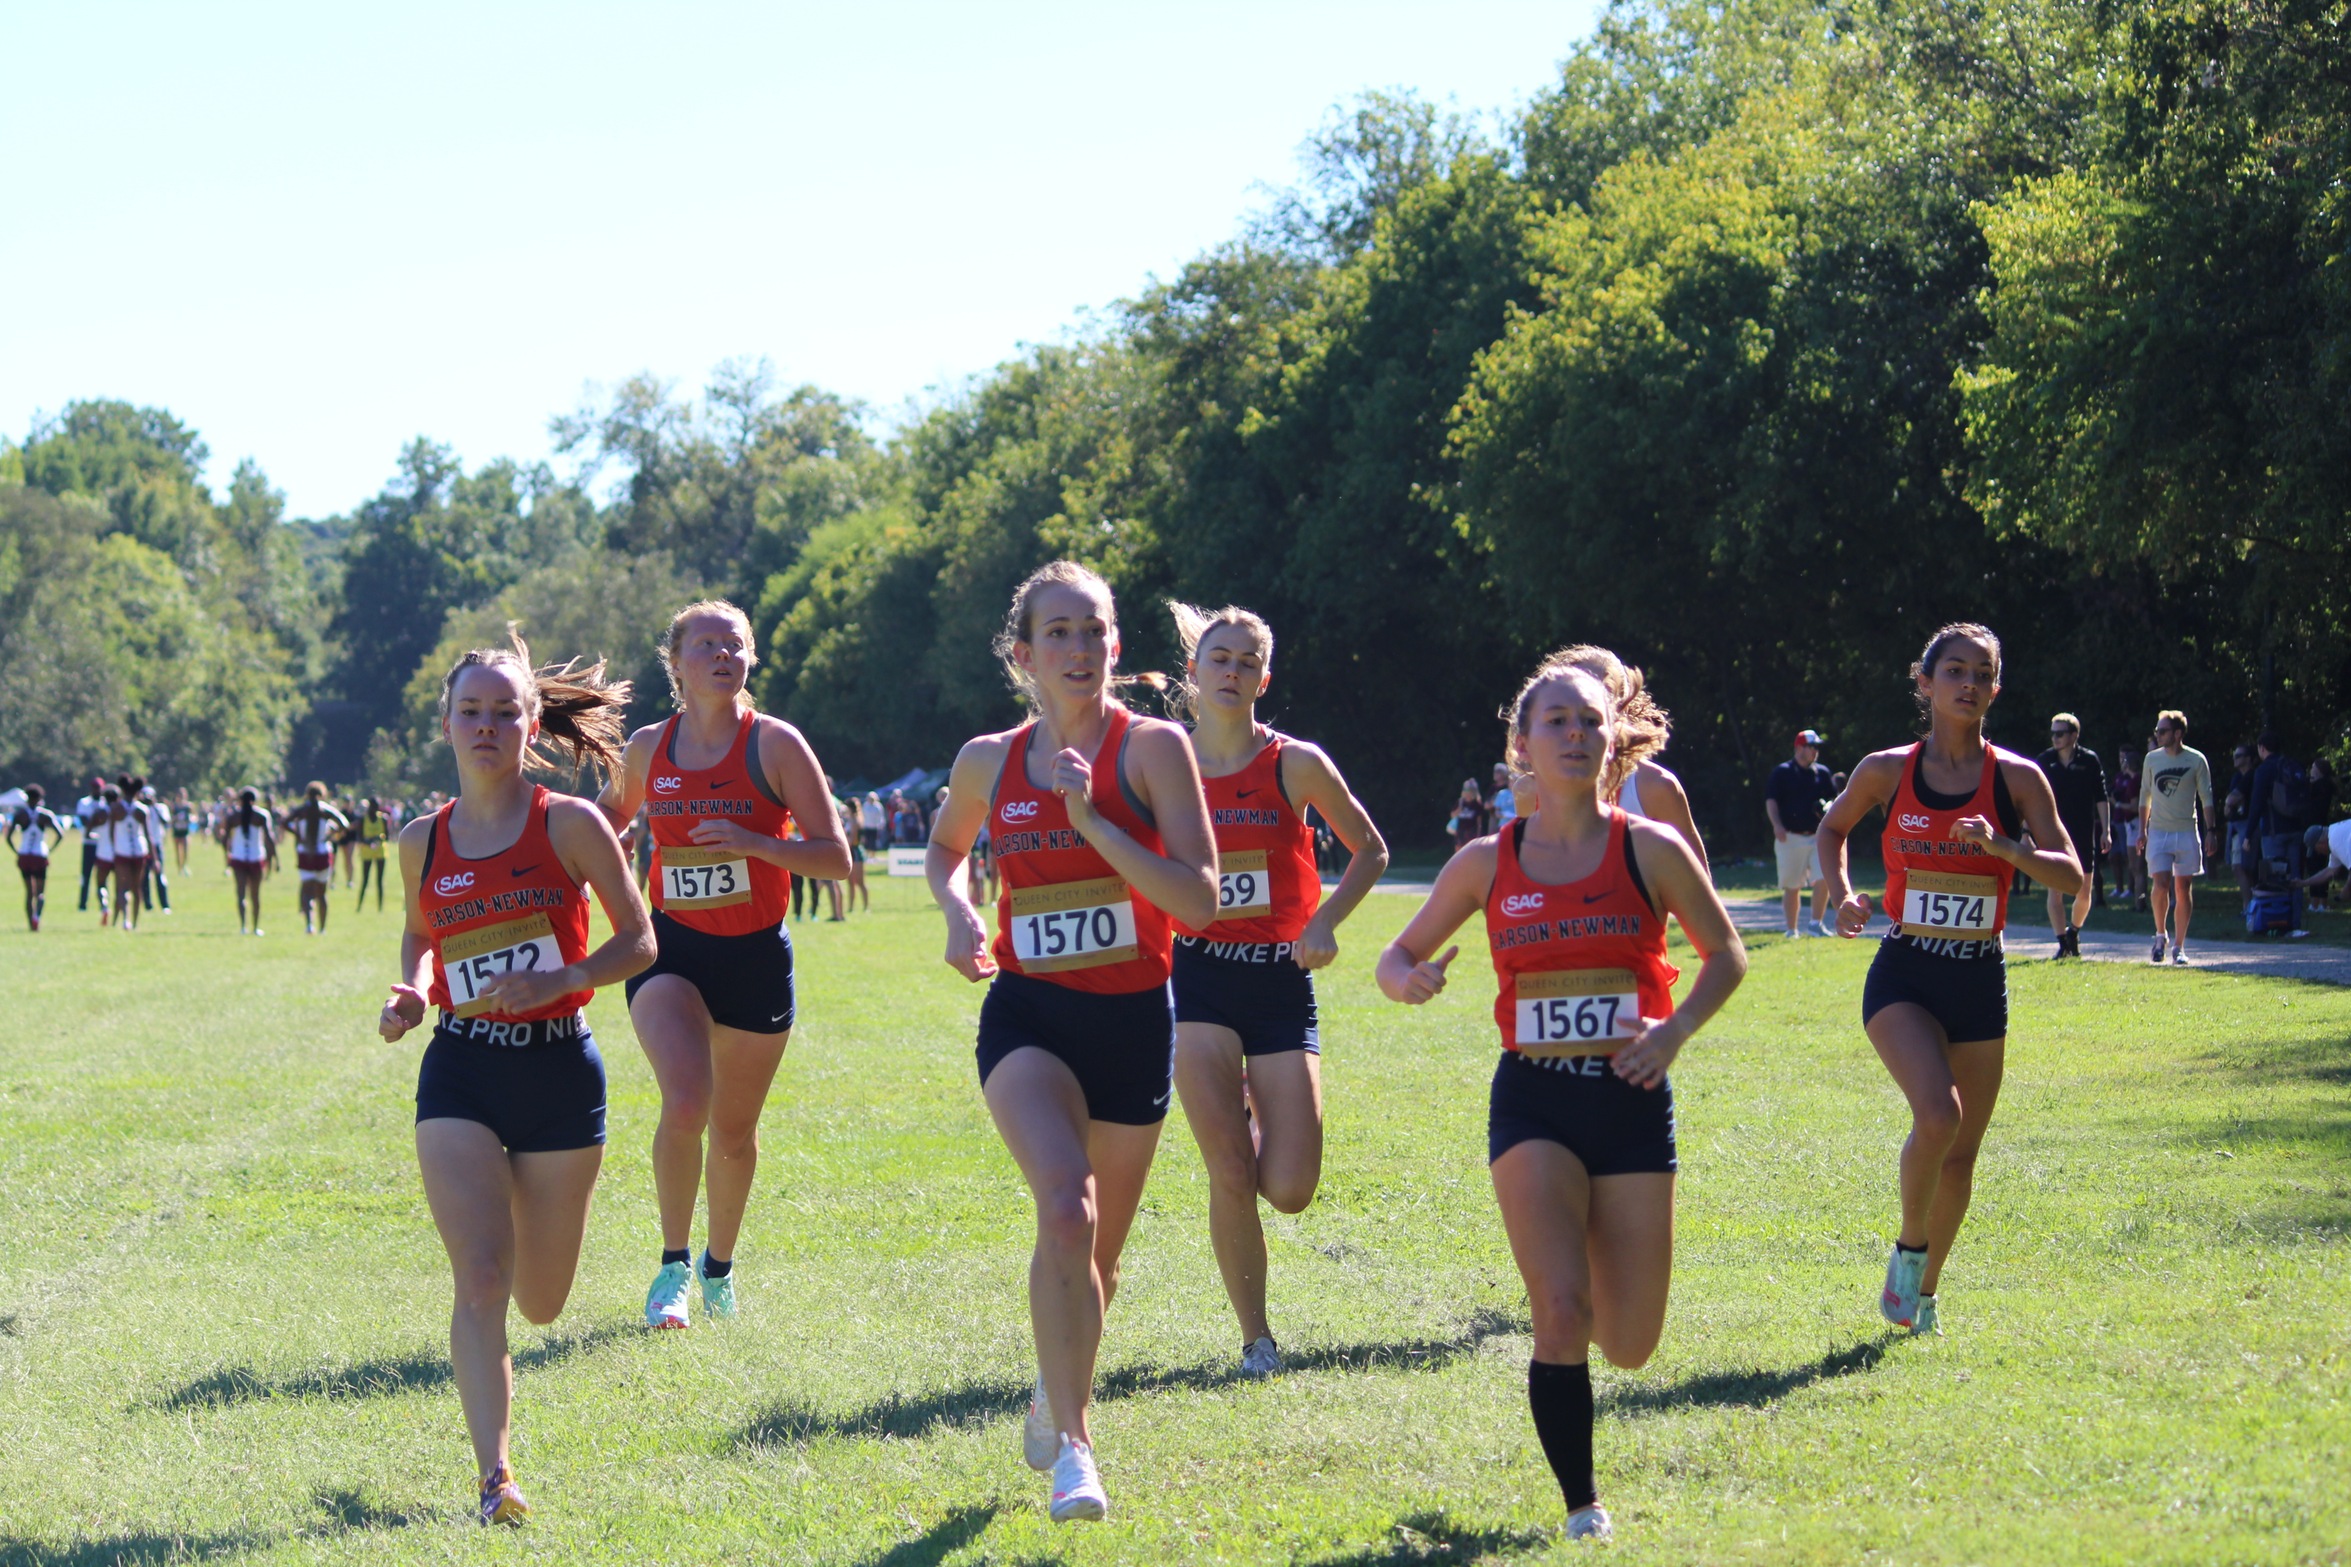 Women's cross country squad hauls in 10th place finish at Queen City Invite